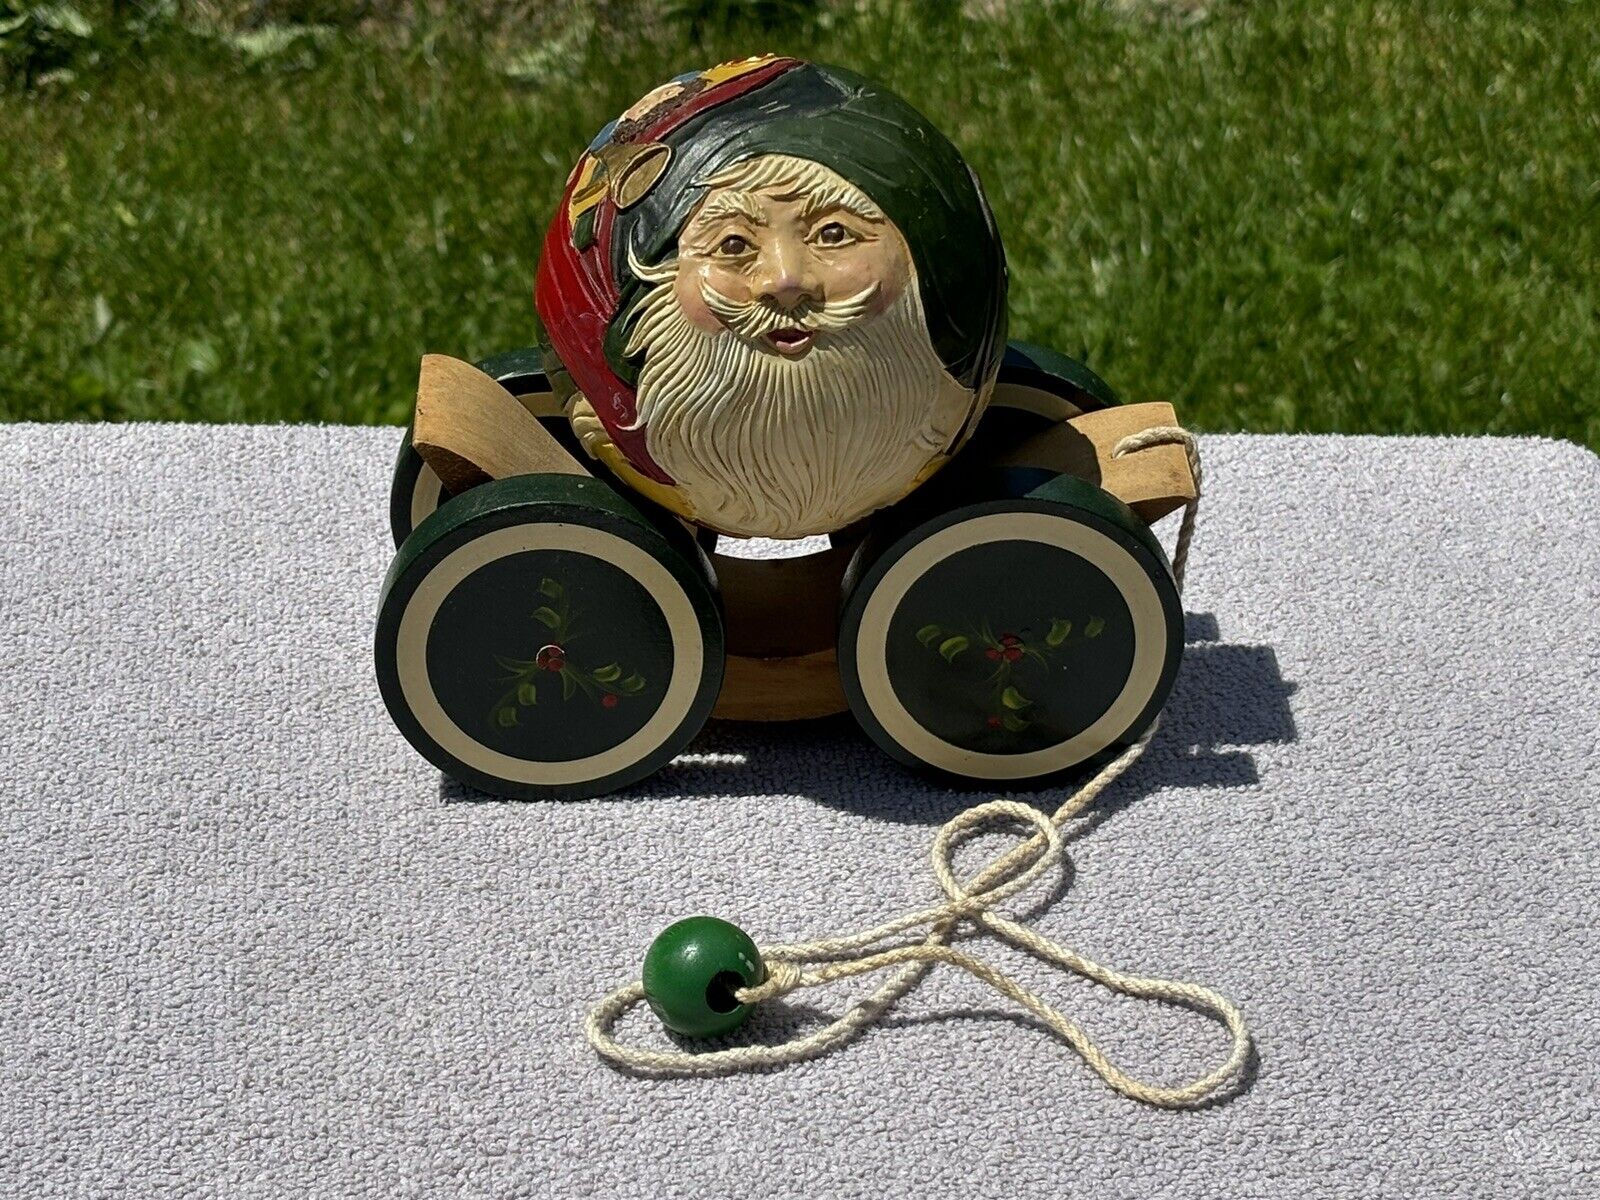 BRIERE Folk Art Pull Toy 1993 SIGNED Old Fashioned Santa Ball & Cart 530/1000 LE